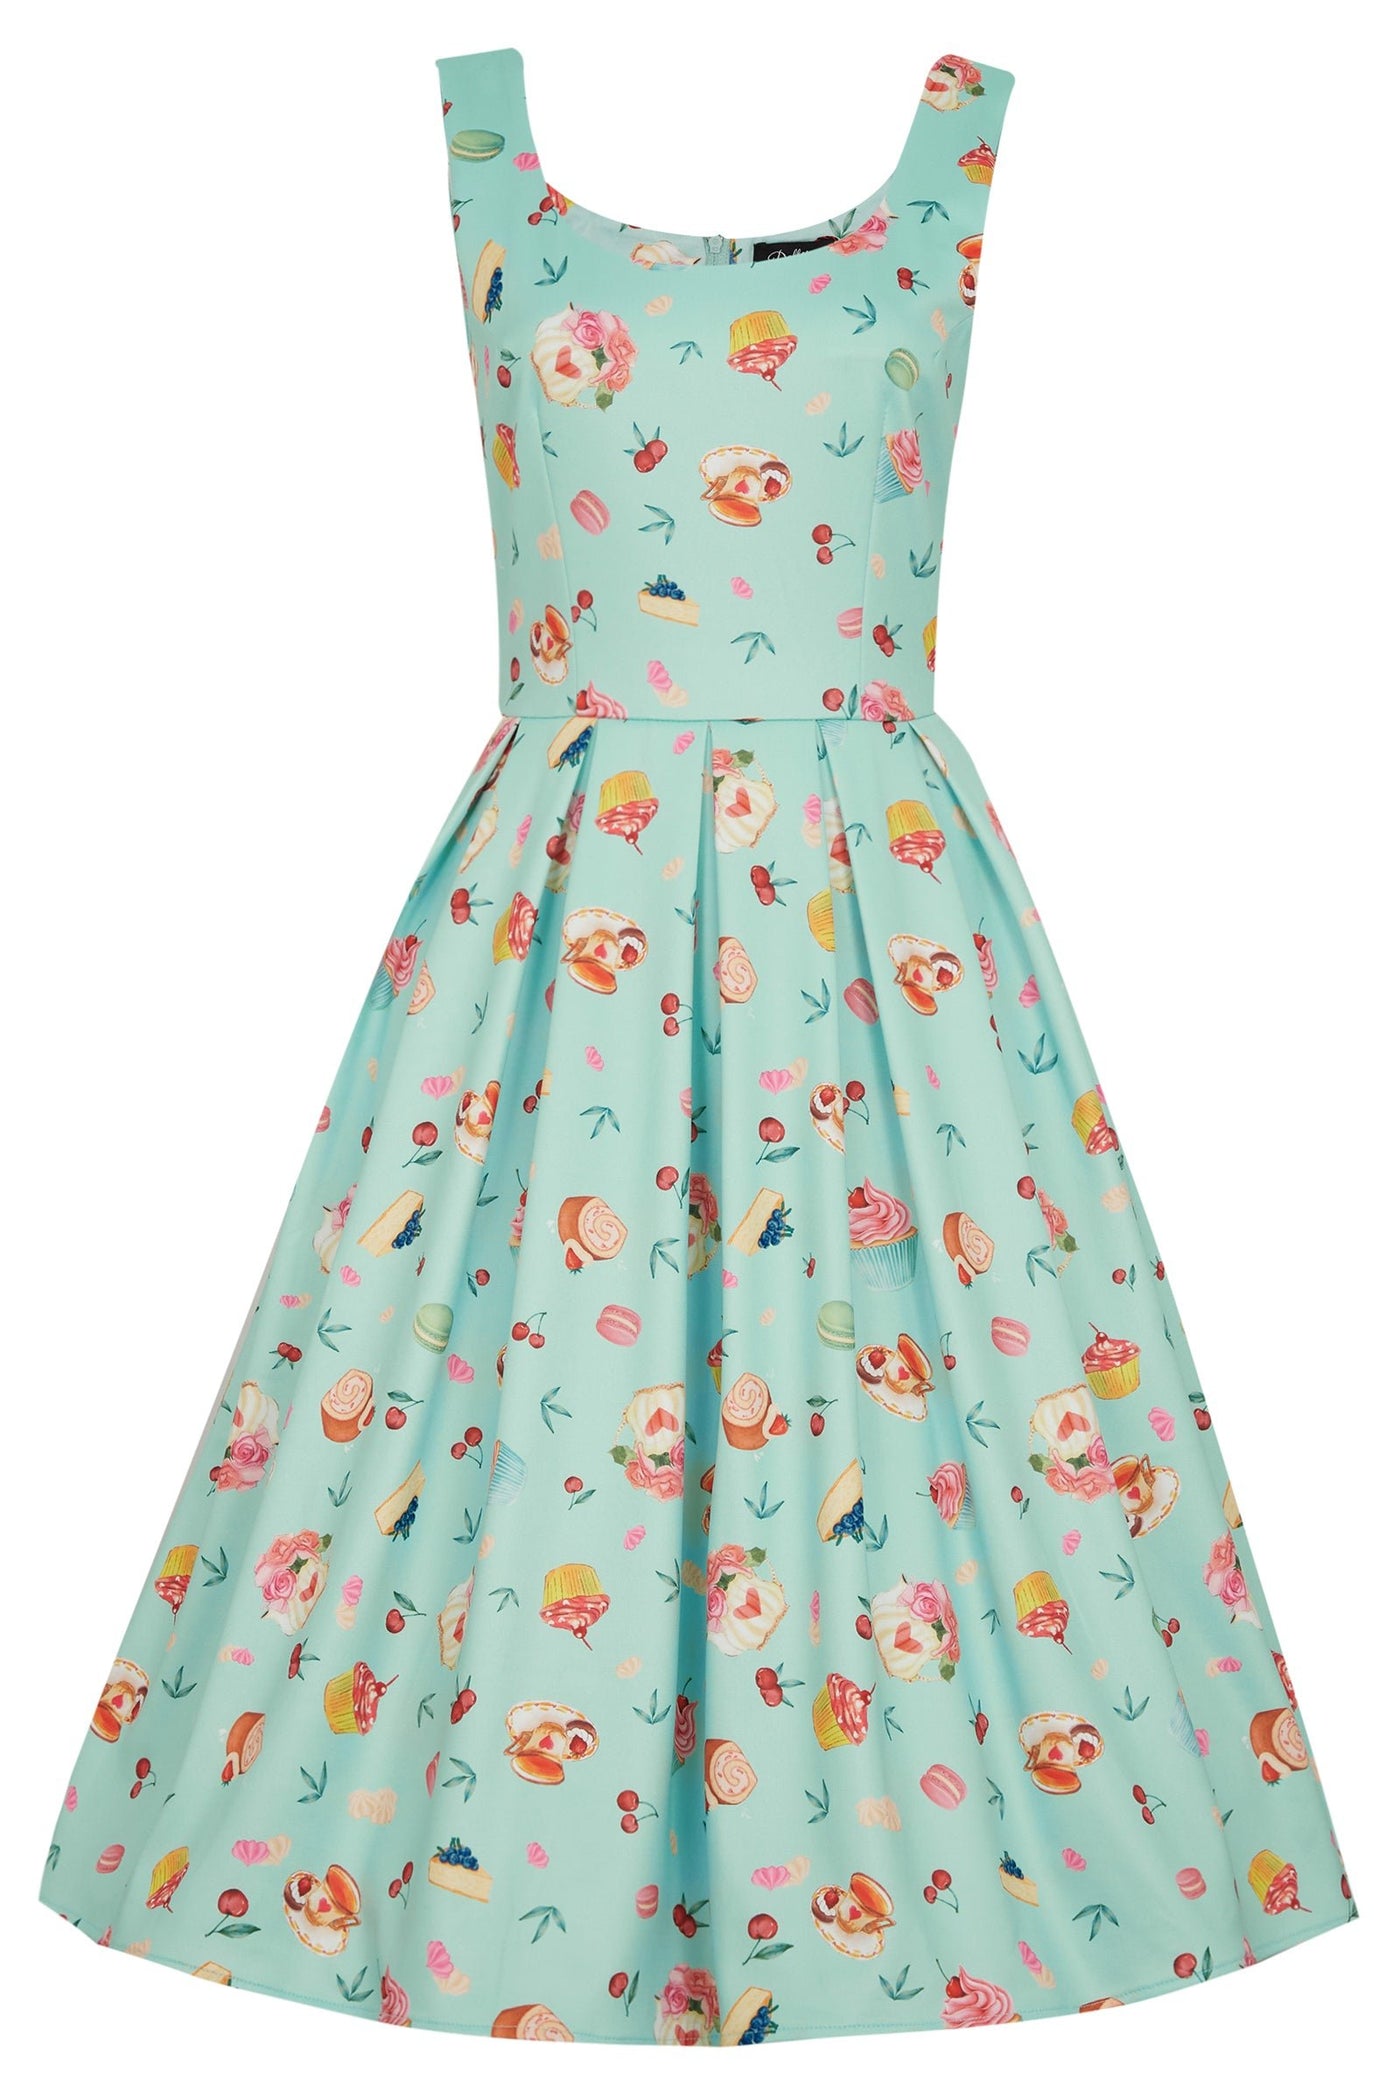 50's Afternoon Tea Dress In Blue Cake Print